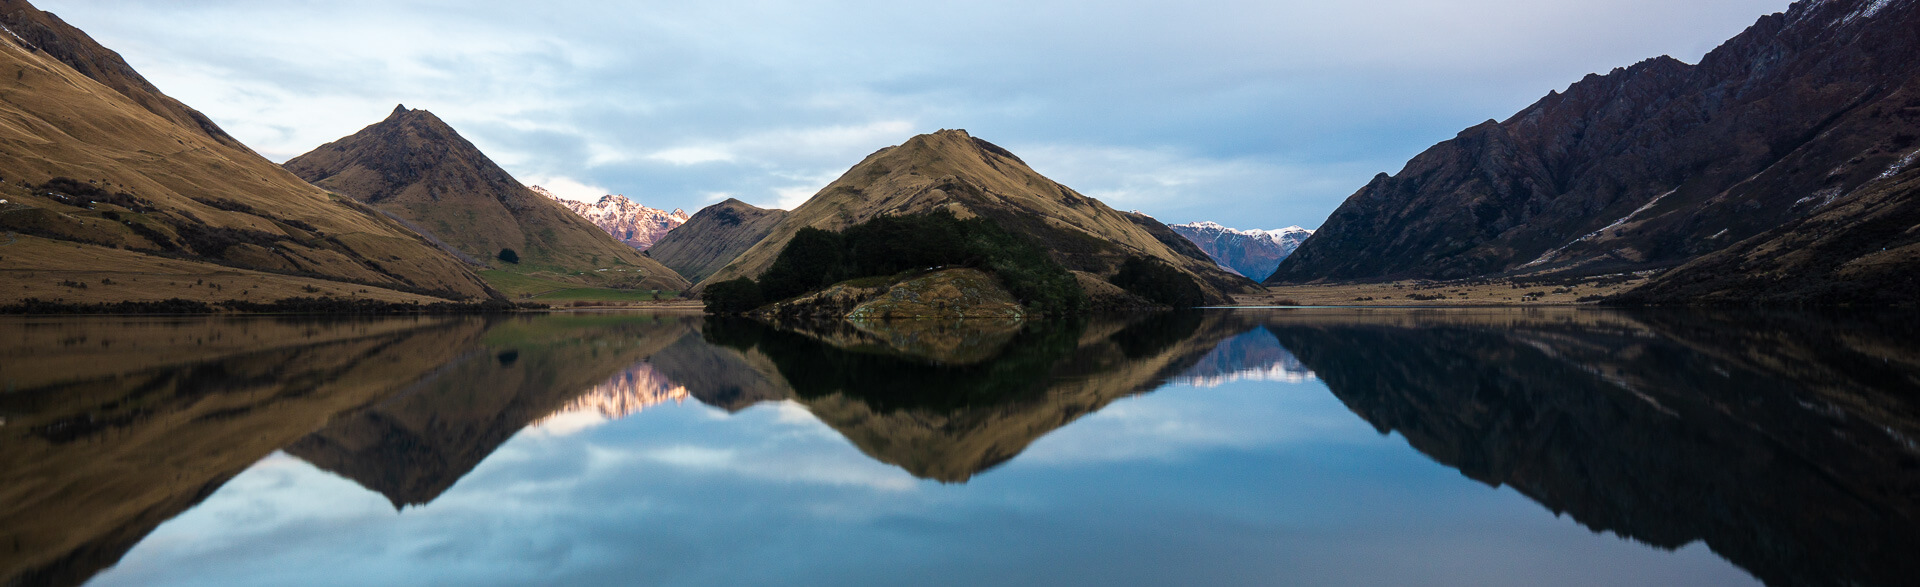 63 BEST Things to Do in Queenstown